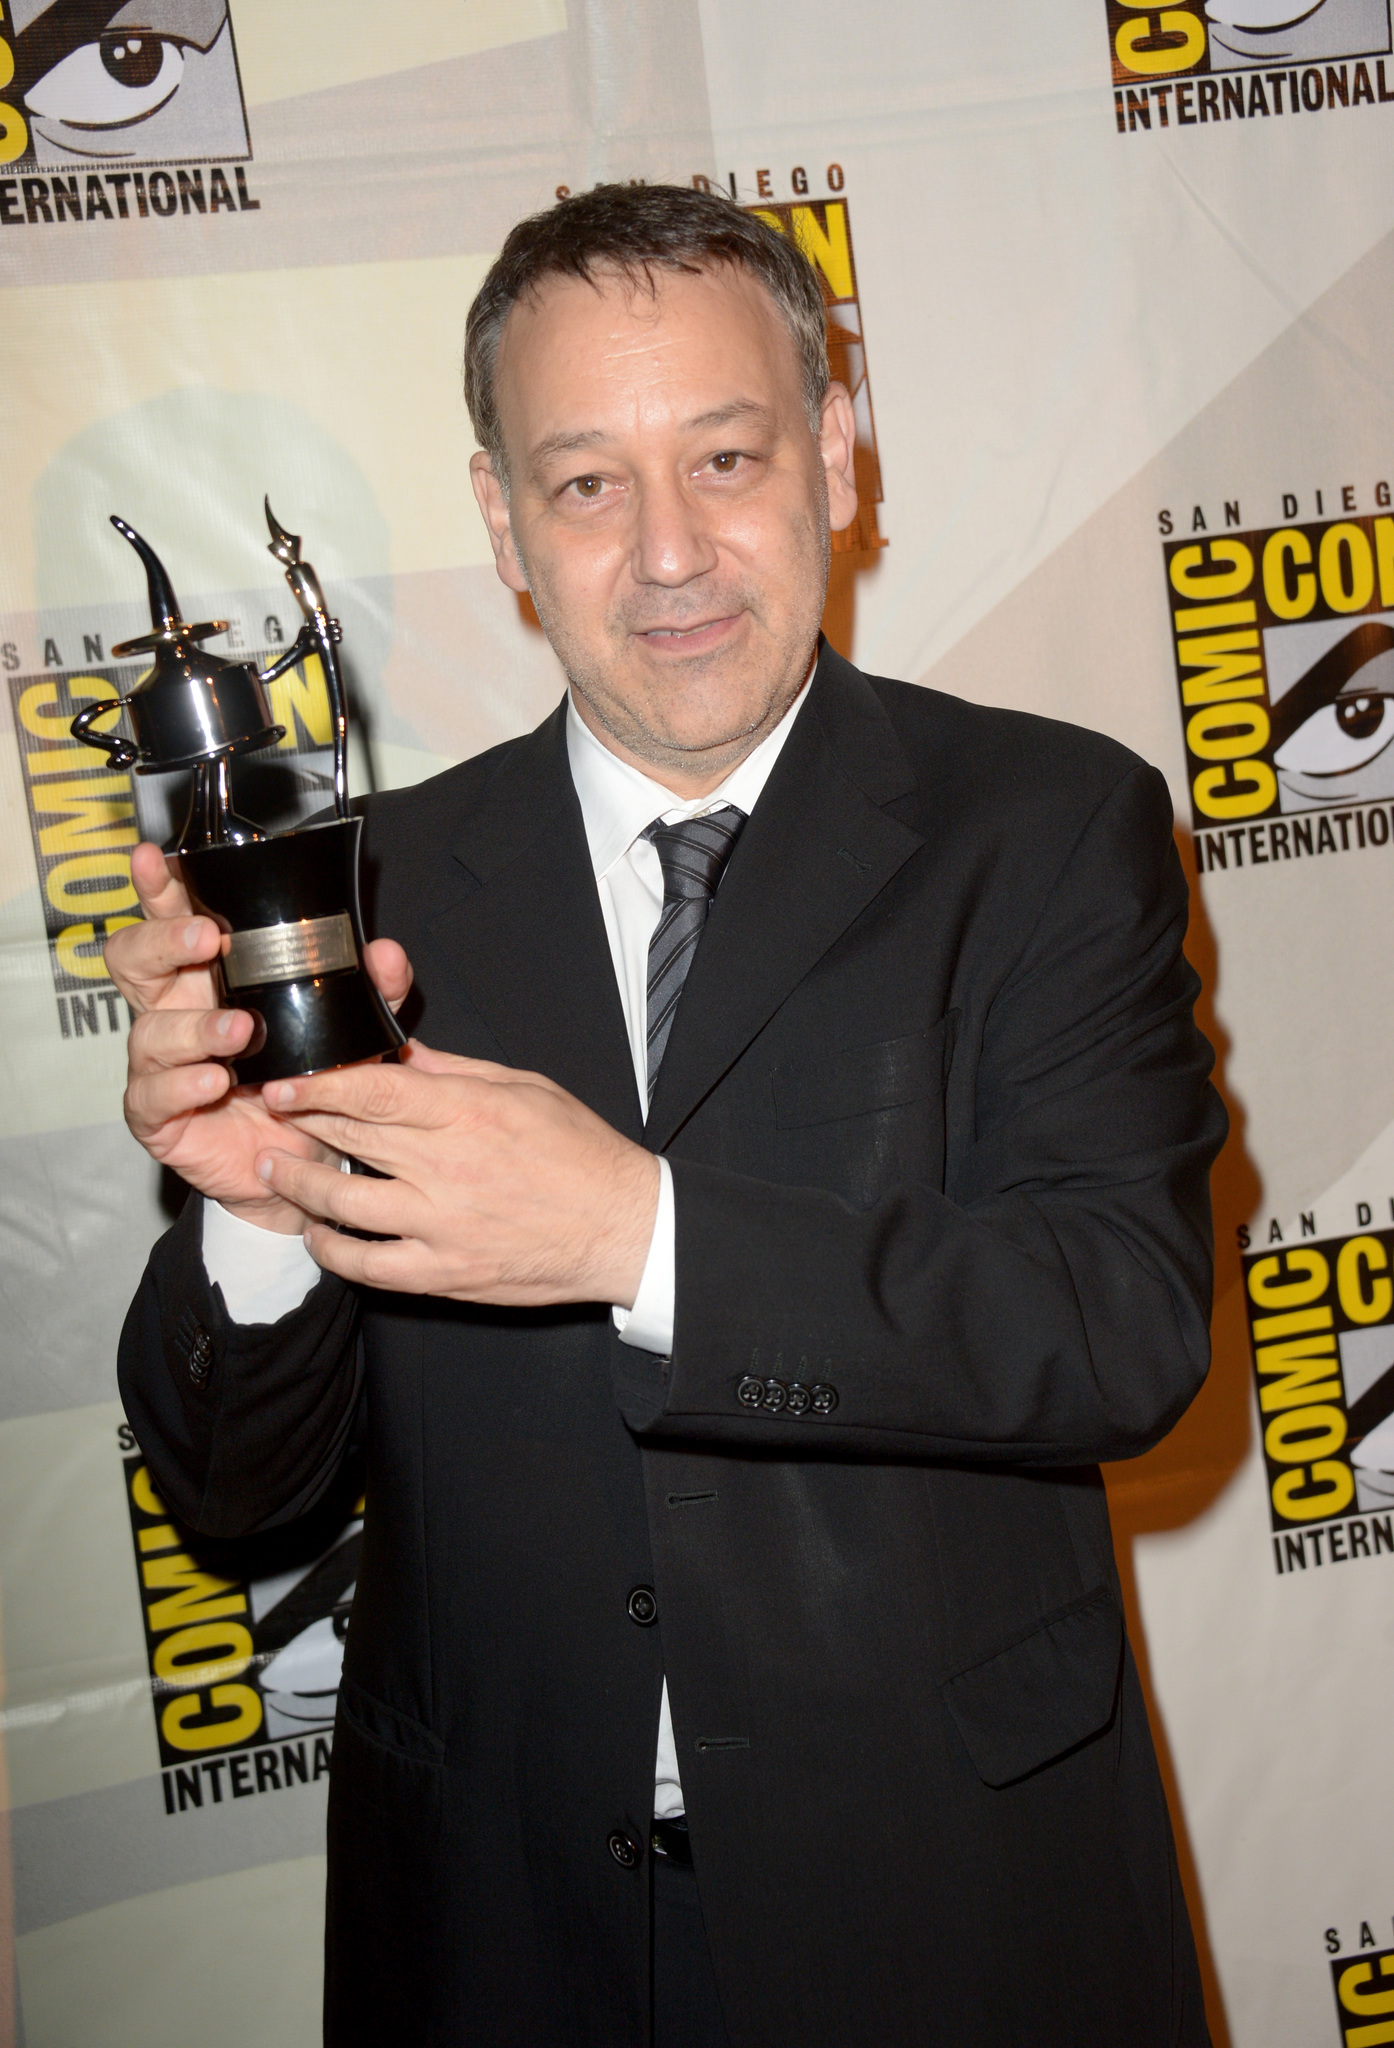 Director Sam Raimi, recipient of Comic-Con International's Inkpot Award, during a surprise appearance during Comic-Con International 2014 at San Diego Convention Center on July 25, 2014 in San Diego, California.